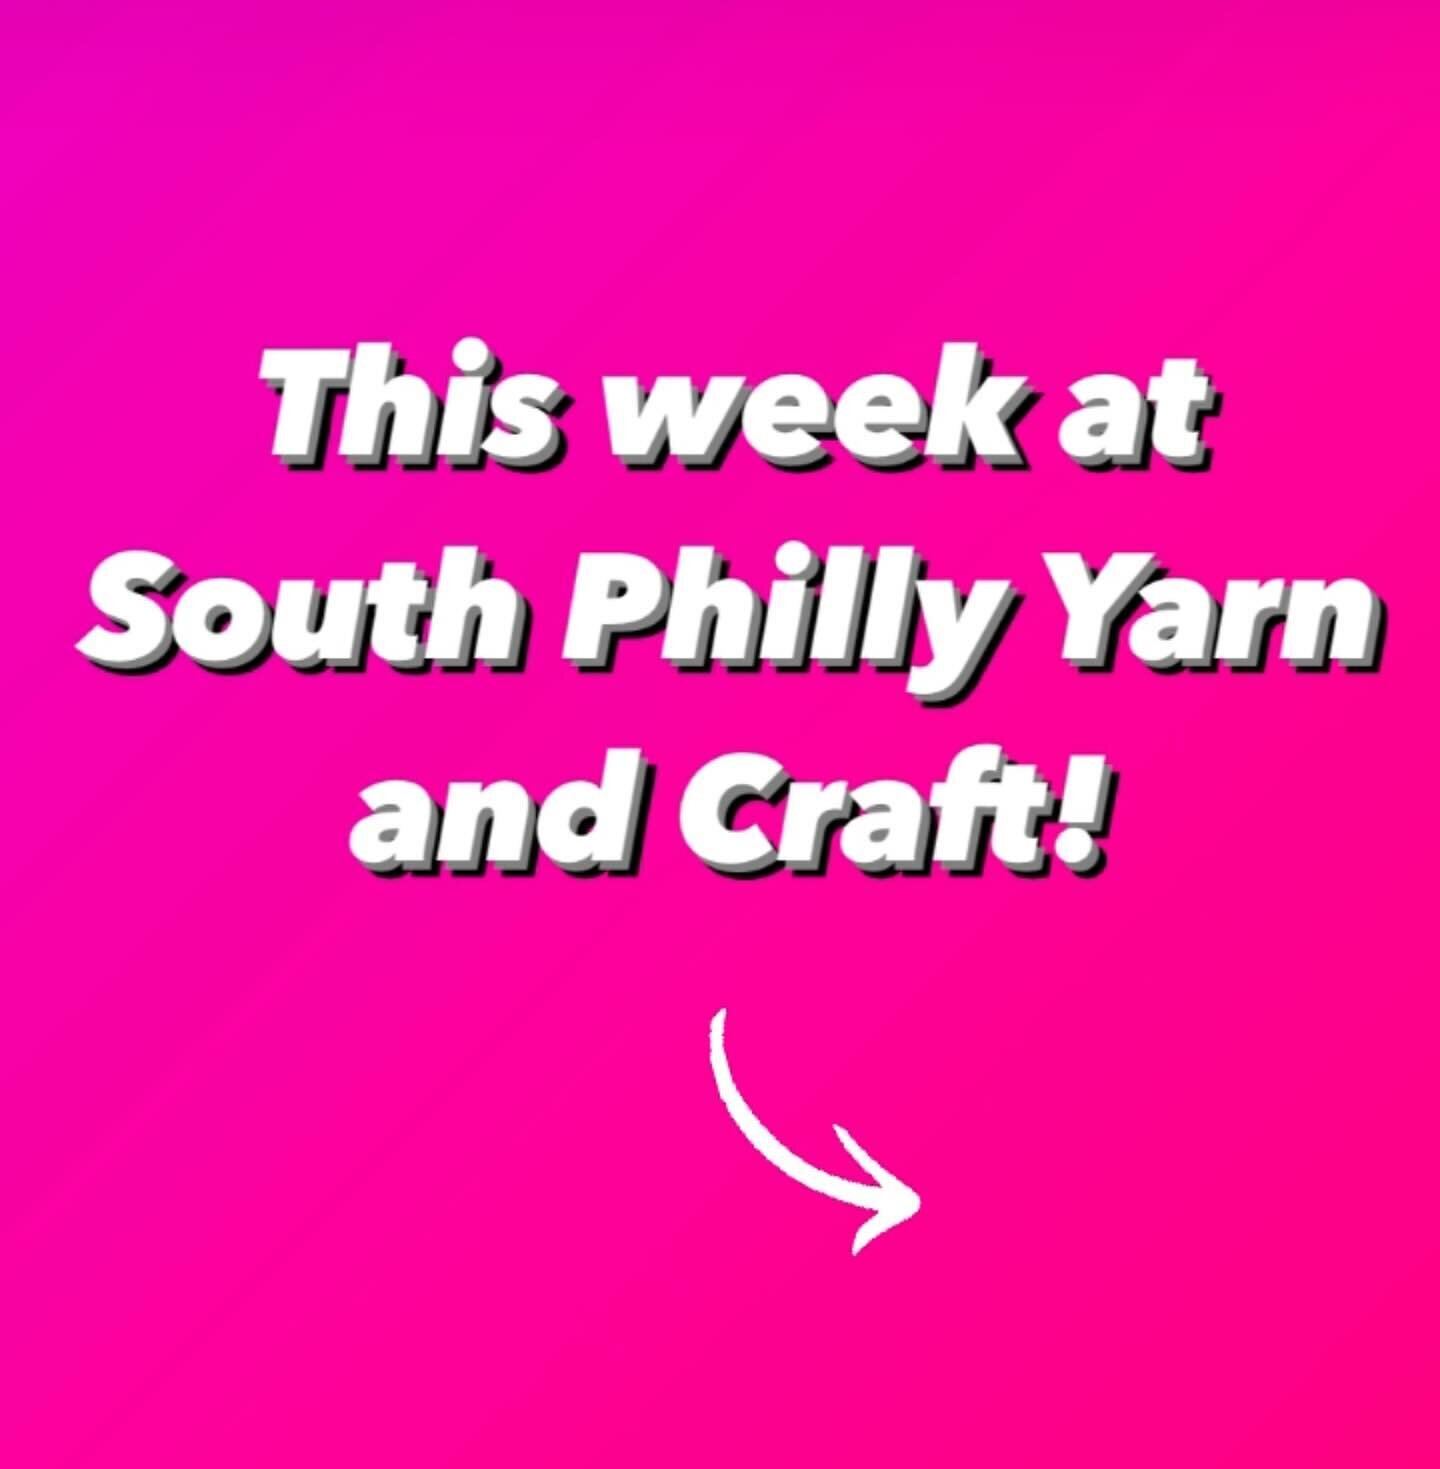 ⭐️Oooh what a week!⭐️

*Wednesday - April 3rd - Beginner Crochet! (Sign up link in bio or website) Only 2 classes available at the moment 

*Thursday - April 4th - it&rsquo;s my dang birthday! Let&rsquo;s pop some champagne, have some snacks, and mak